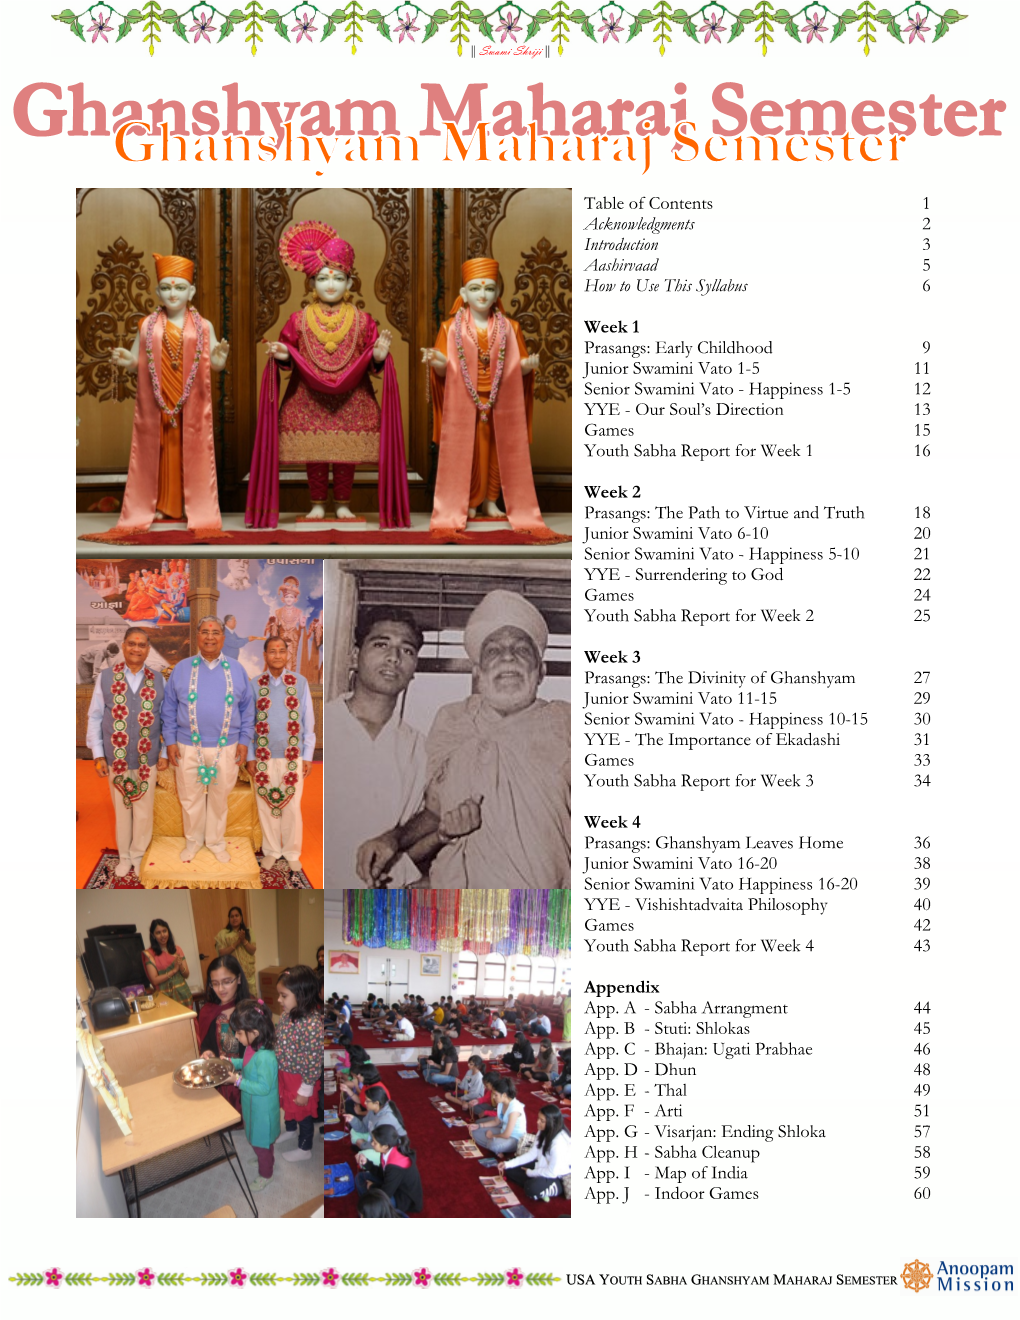 Table of Contents Acknowledgments Introduction Aashirvaad How to Use This Syllabus Week 1 Prasangs: Early Childhood Junior Swami